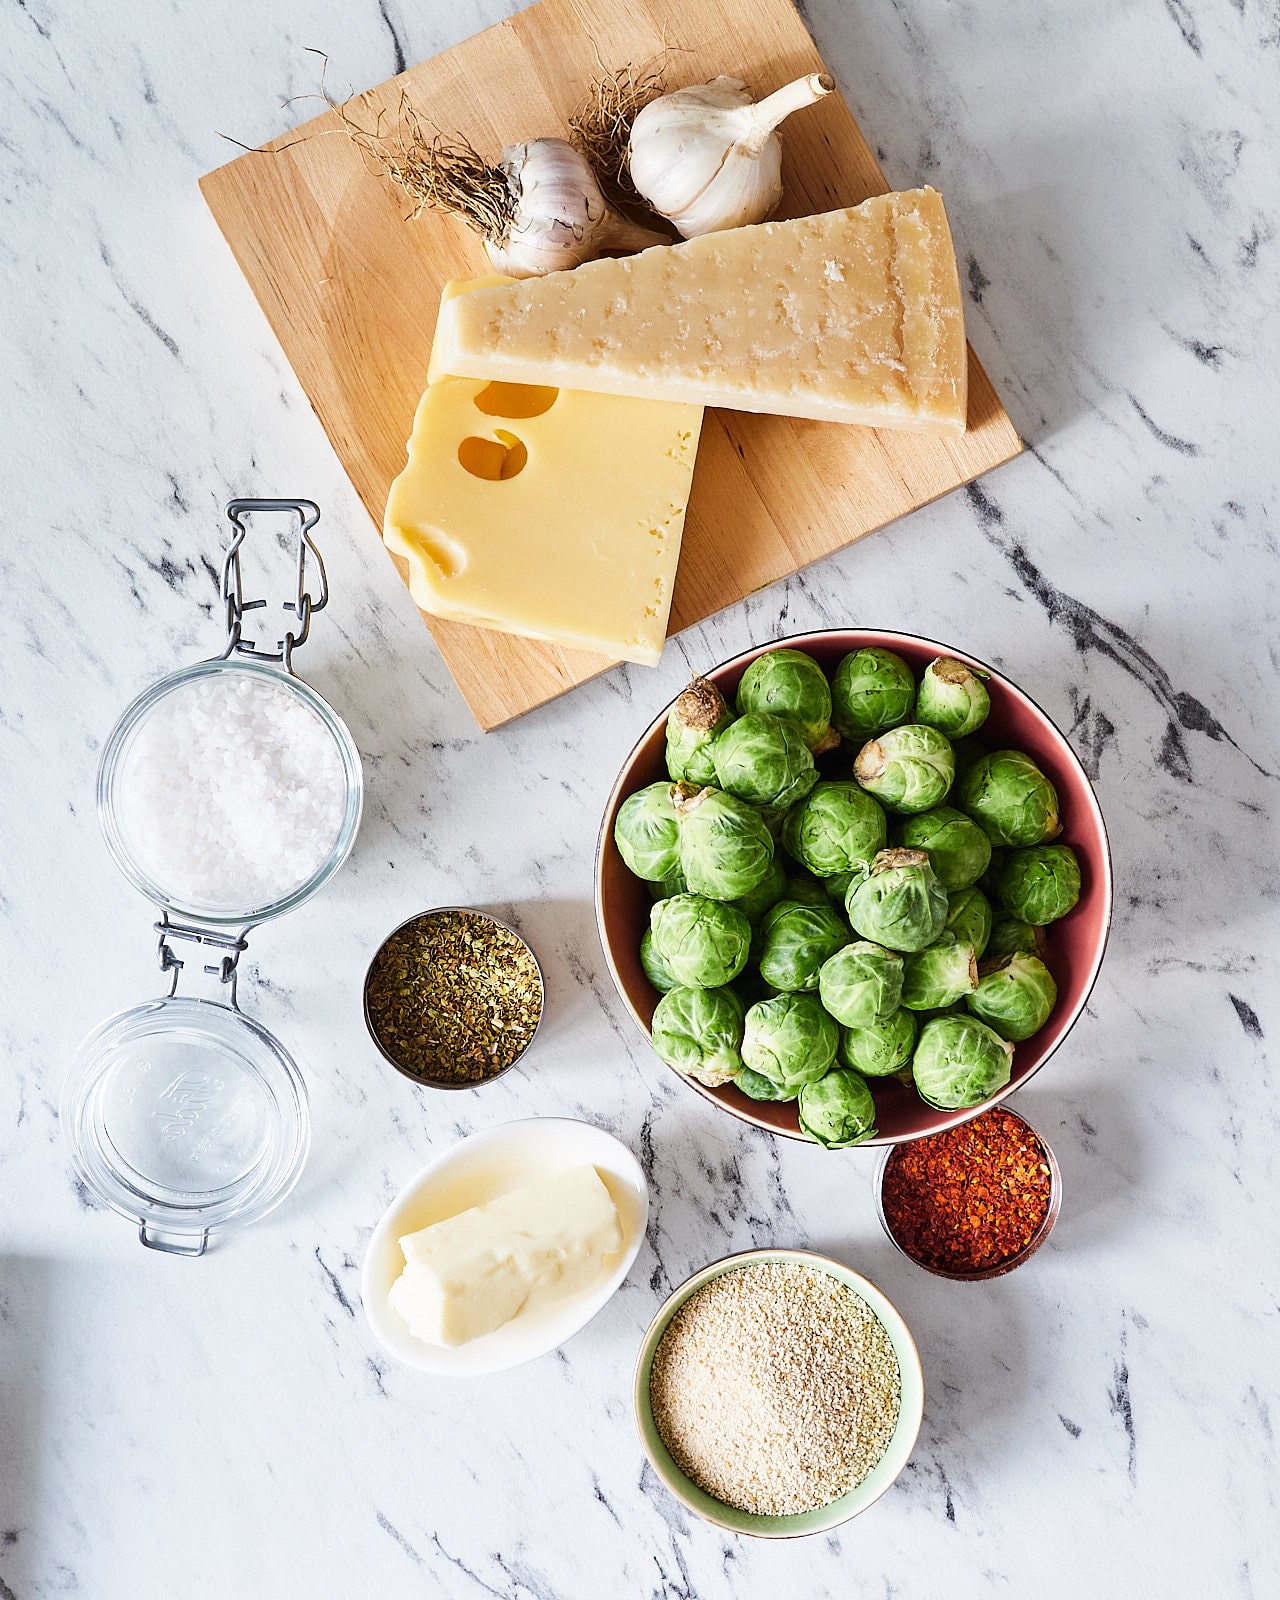 Crispy and Cheesy Brussel Sprouts Ingredients